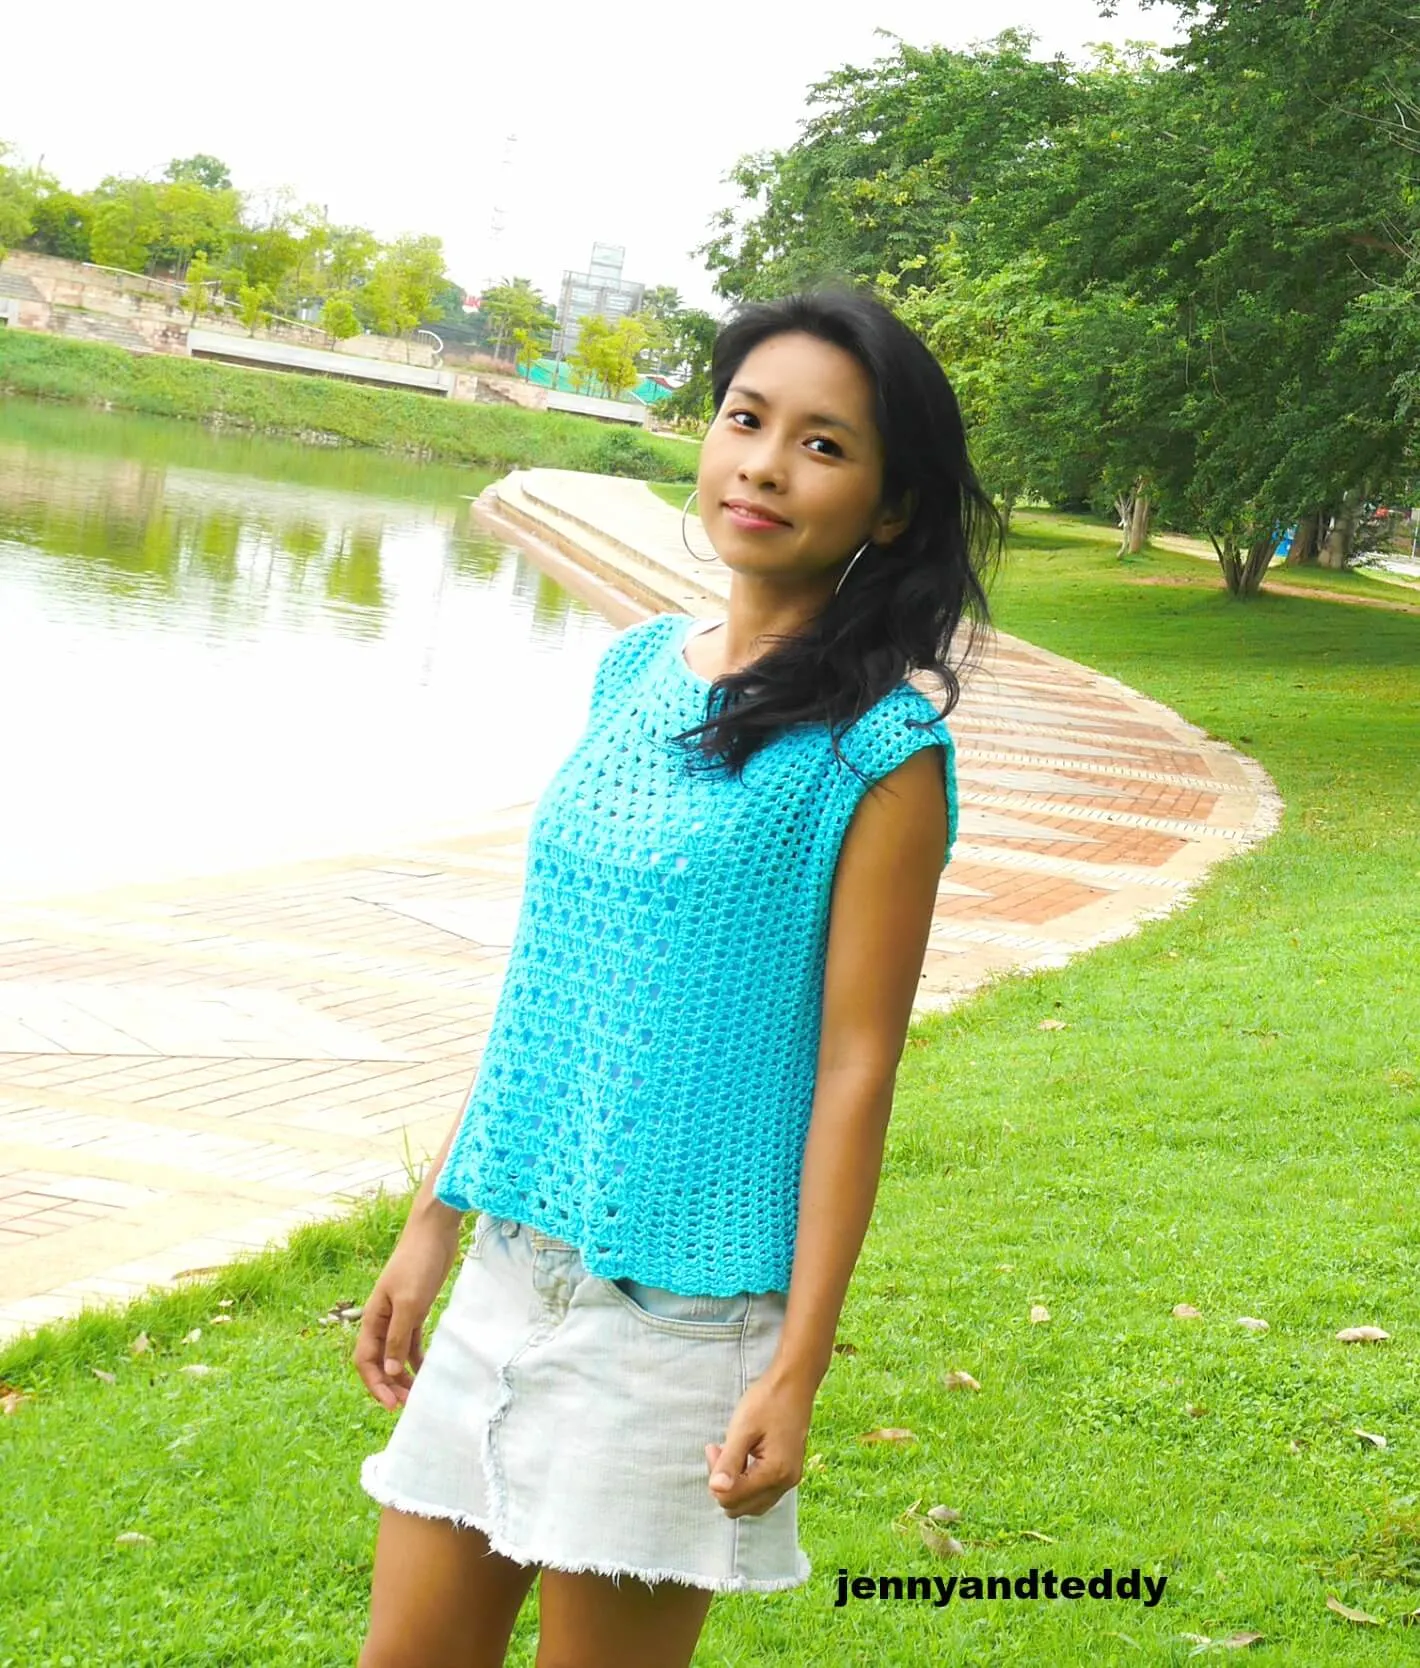 crochet top with granny square top free pattern with video tutorial.